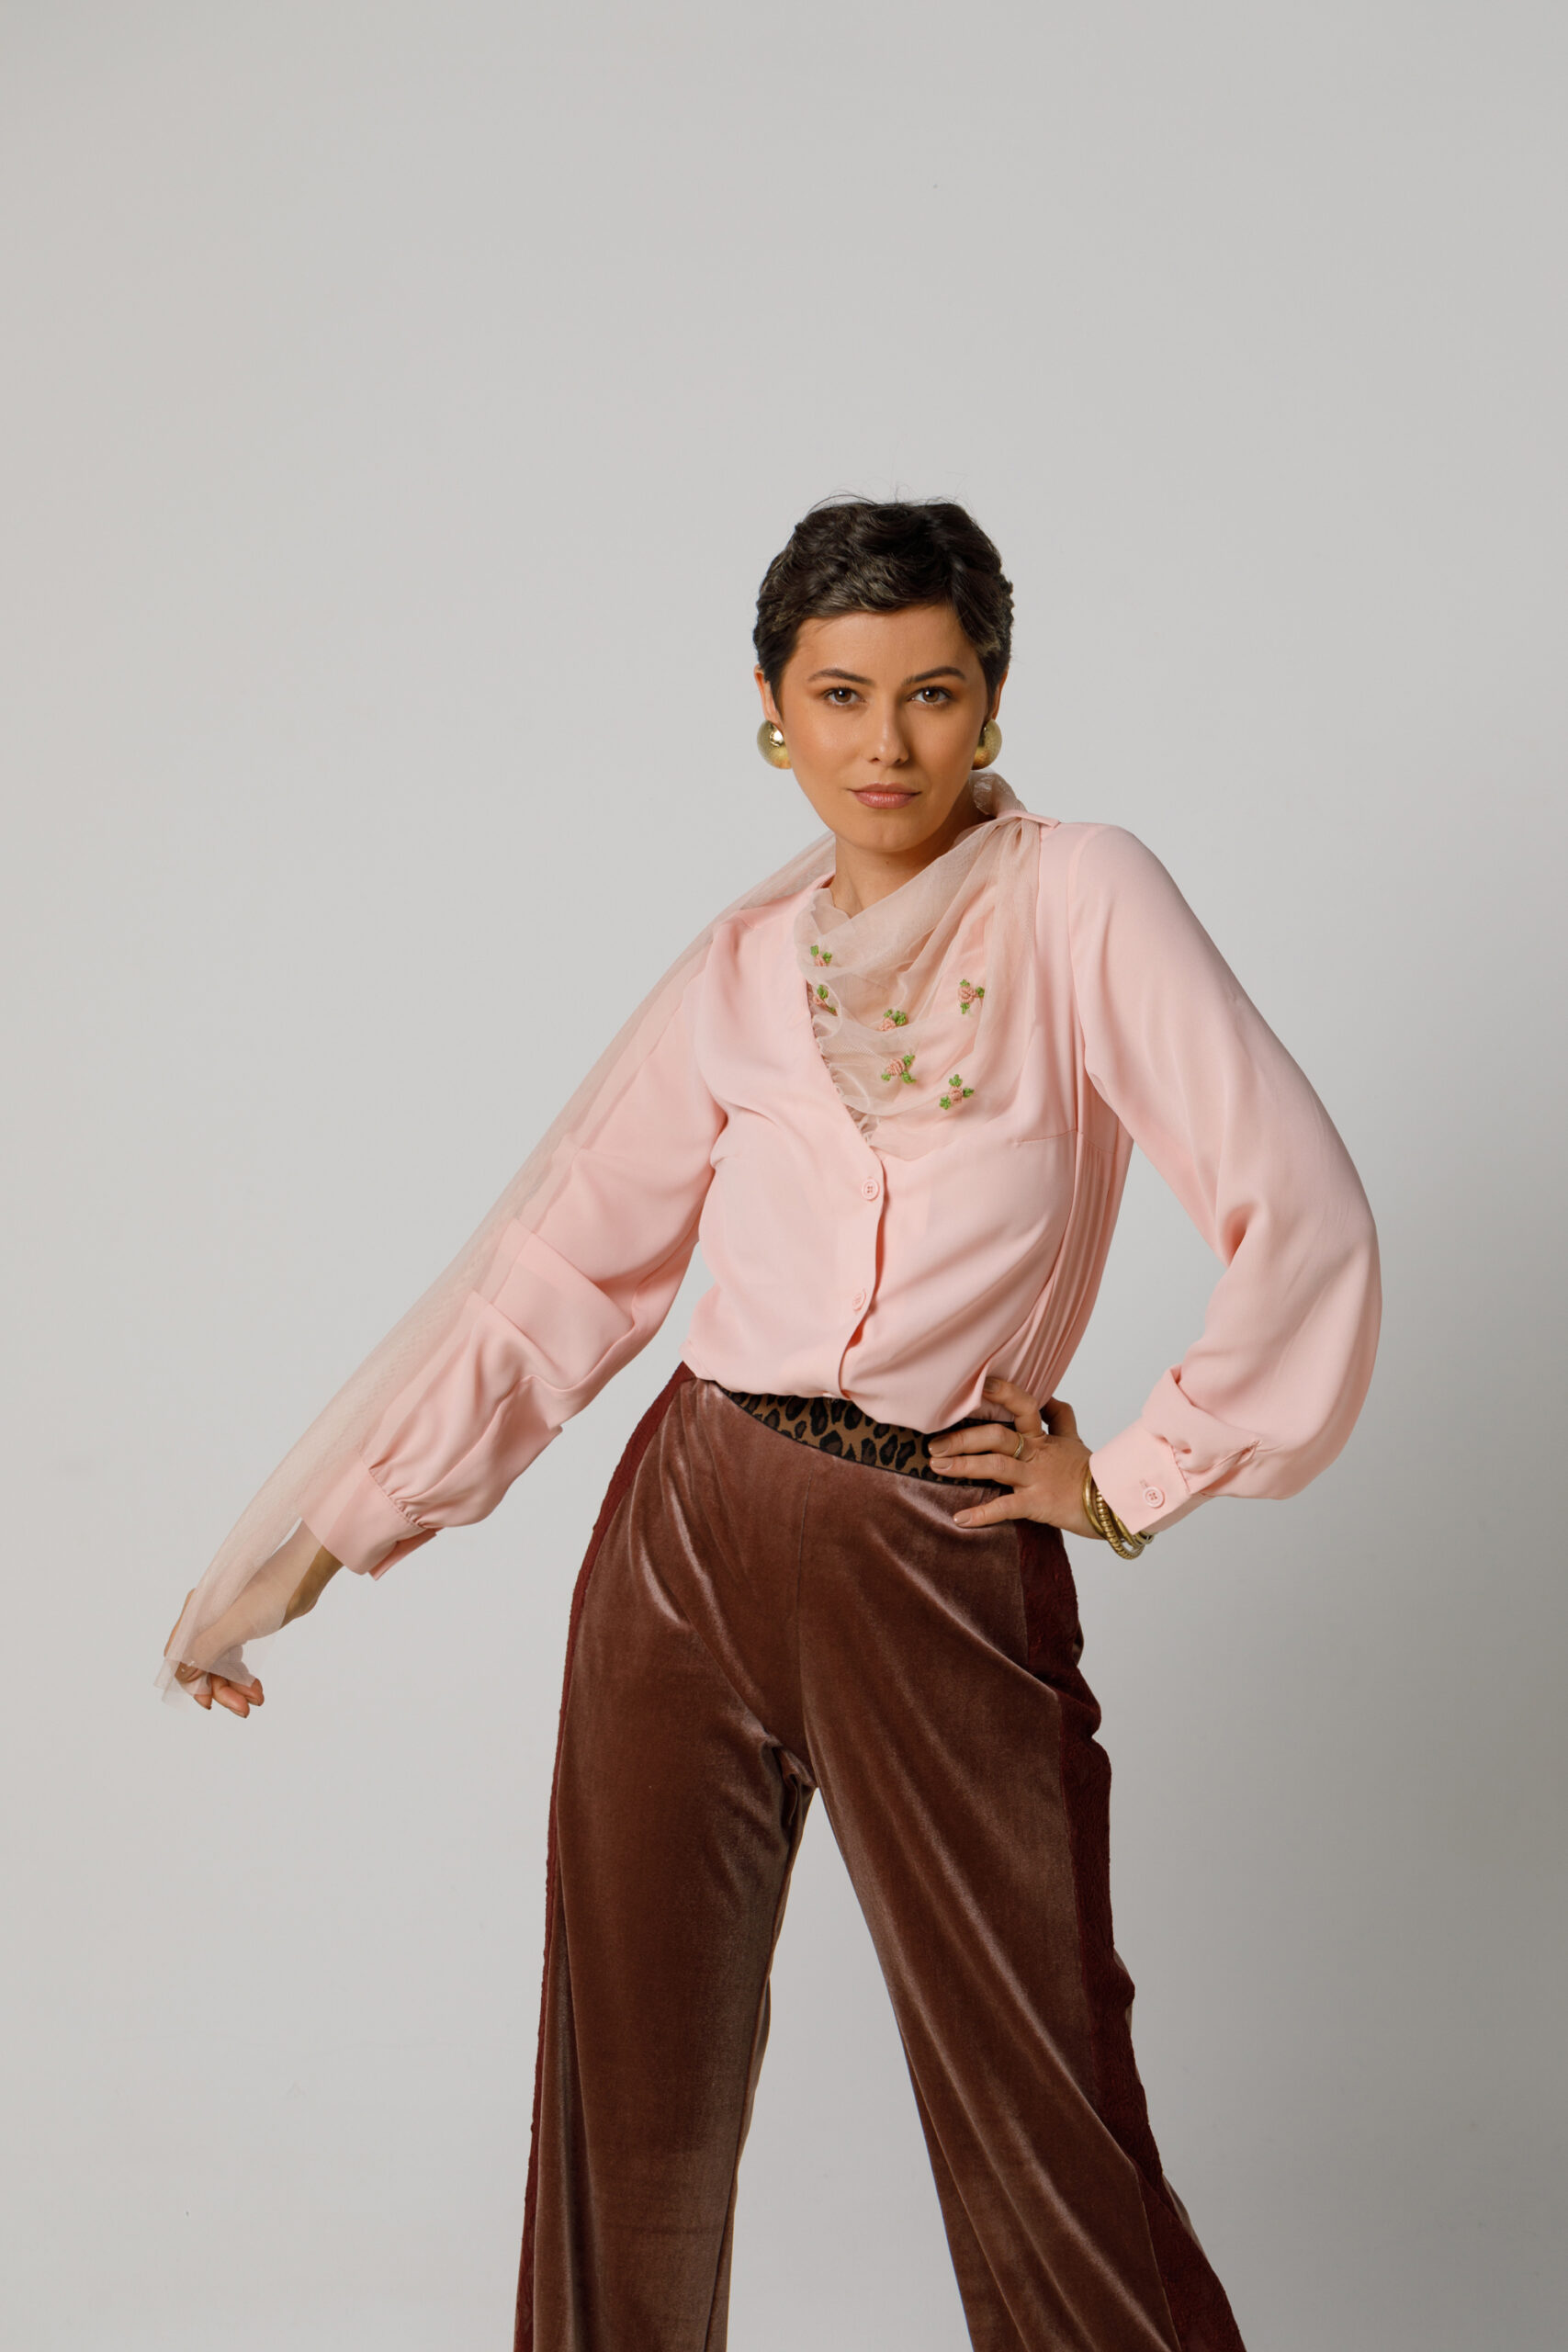 ETTA Elegant pink shirt with scarf and floral embroidery. Natural fabrics, original design, handmade embroidery